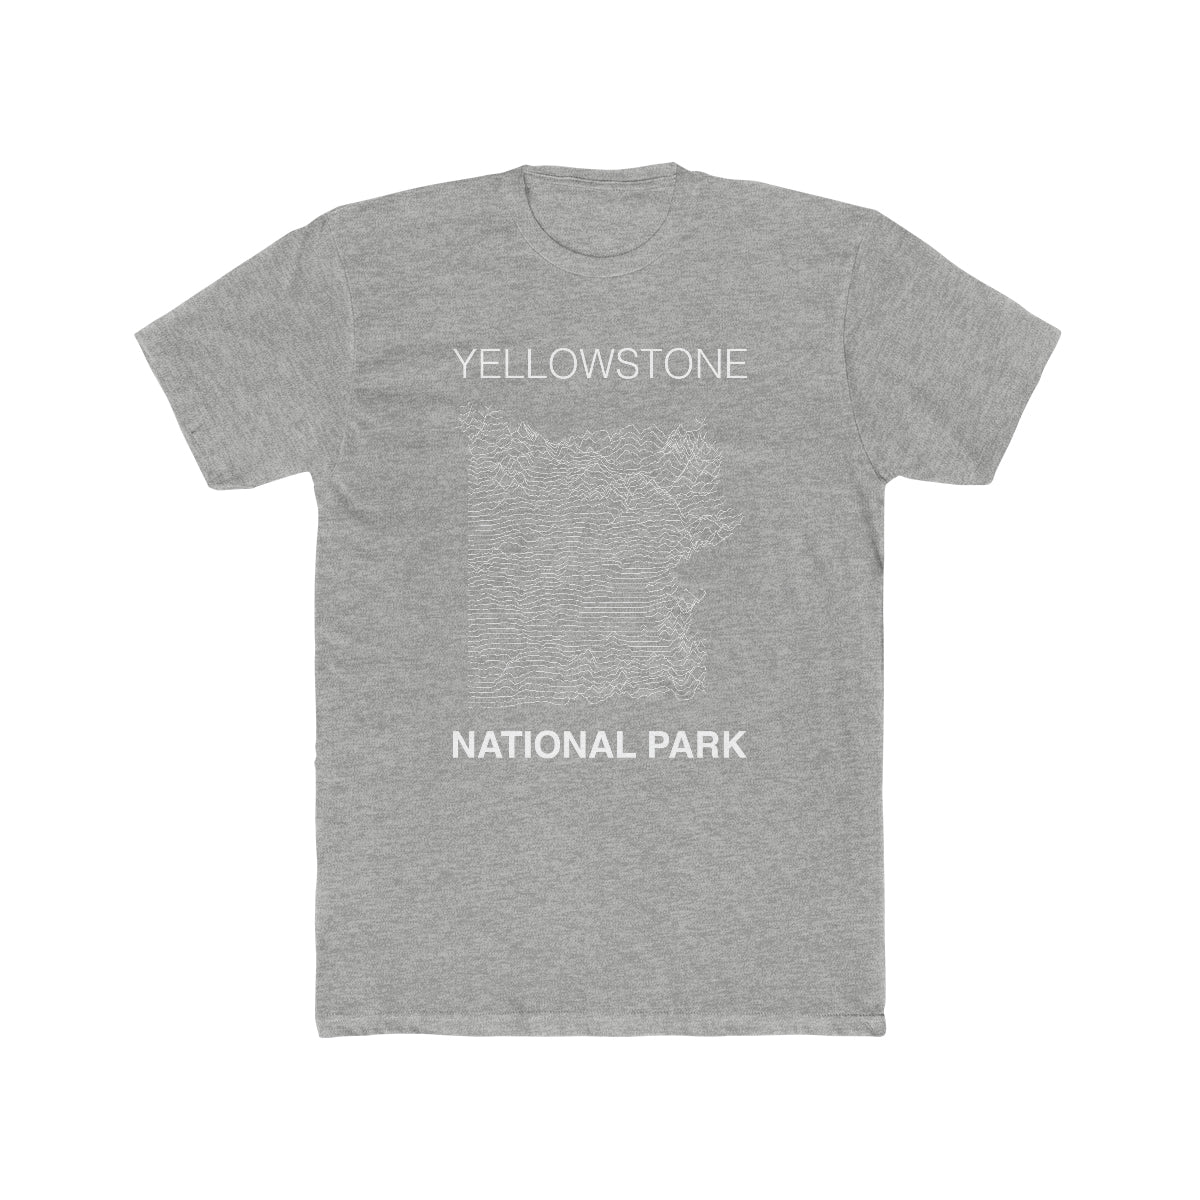 Yellowstone National Park T-Shirt Lines